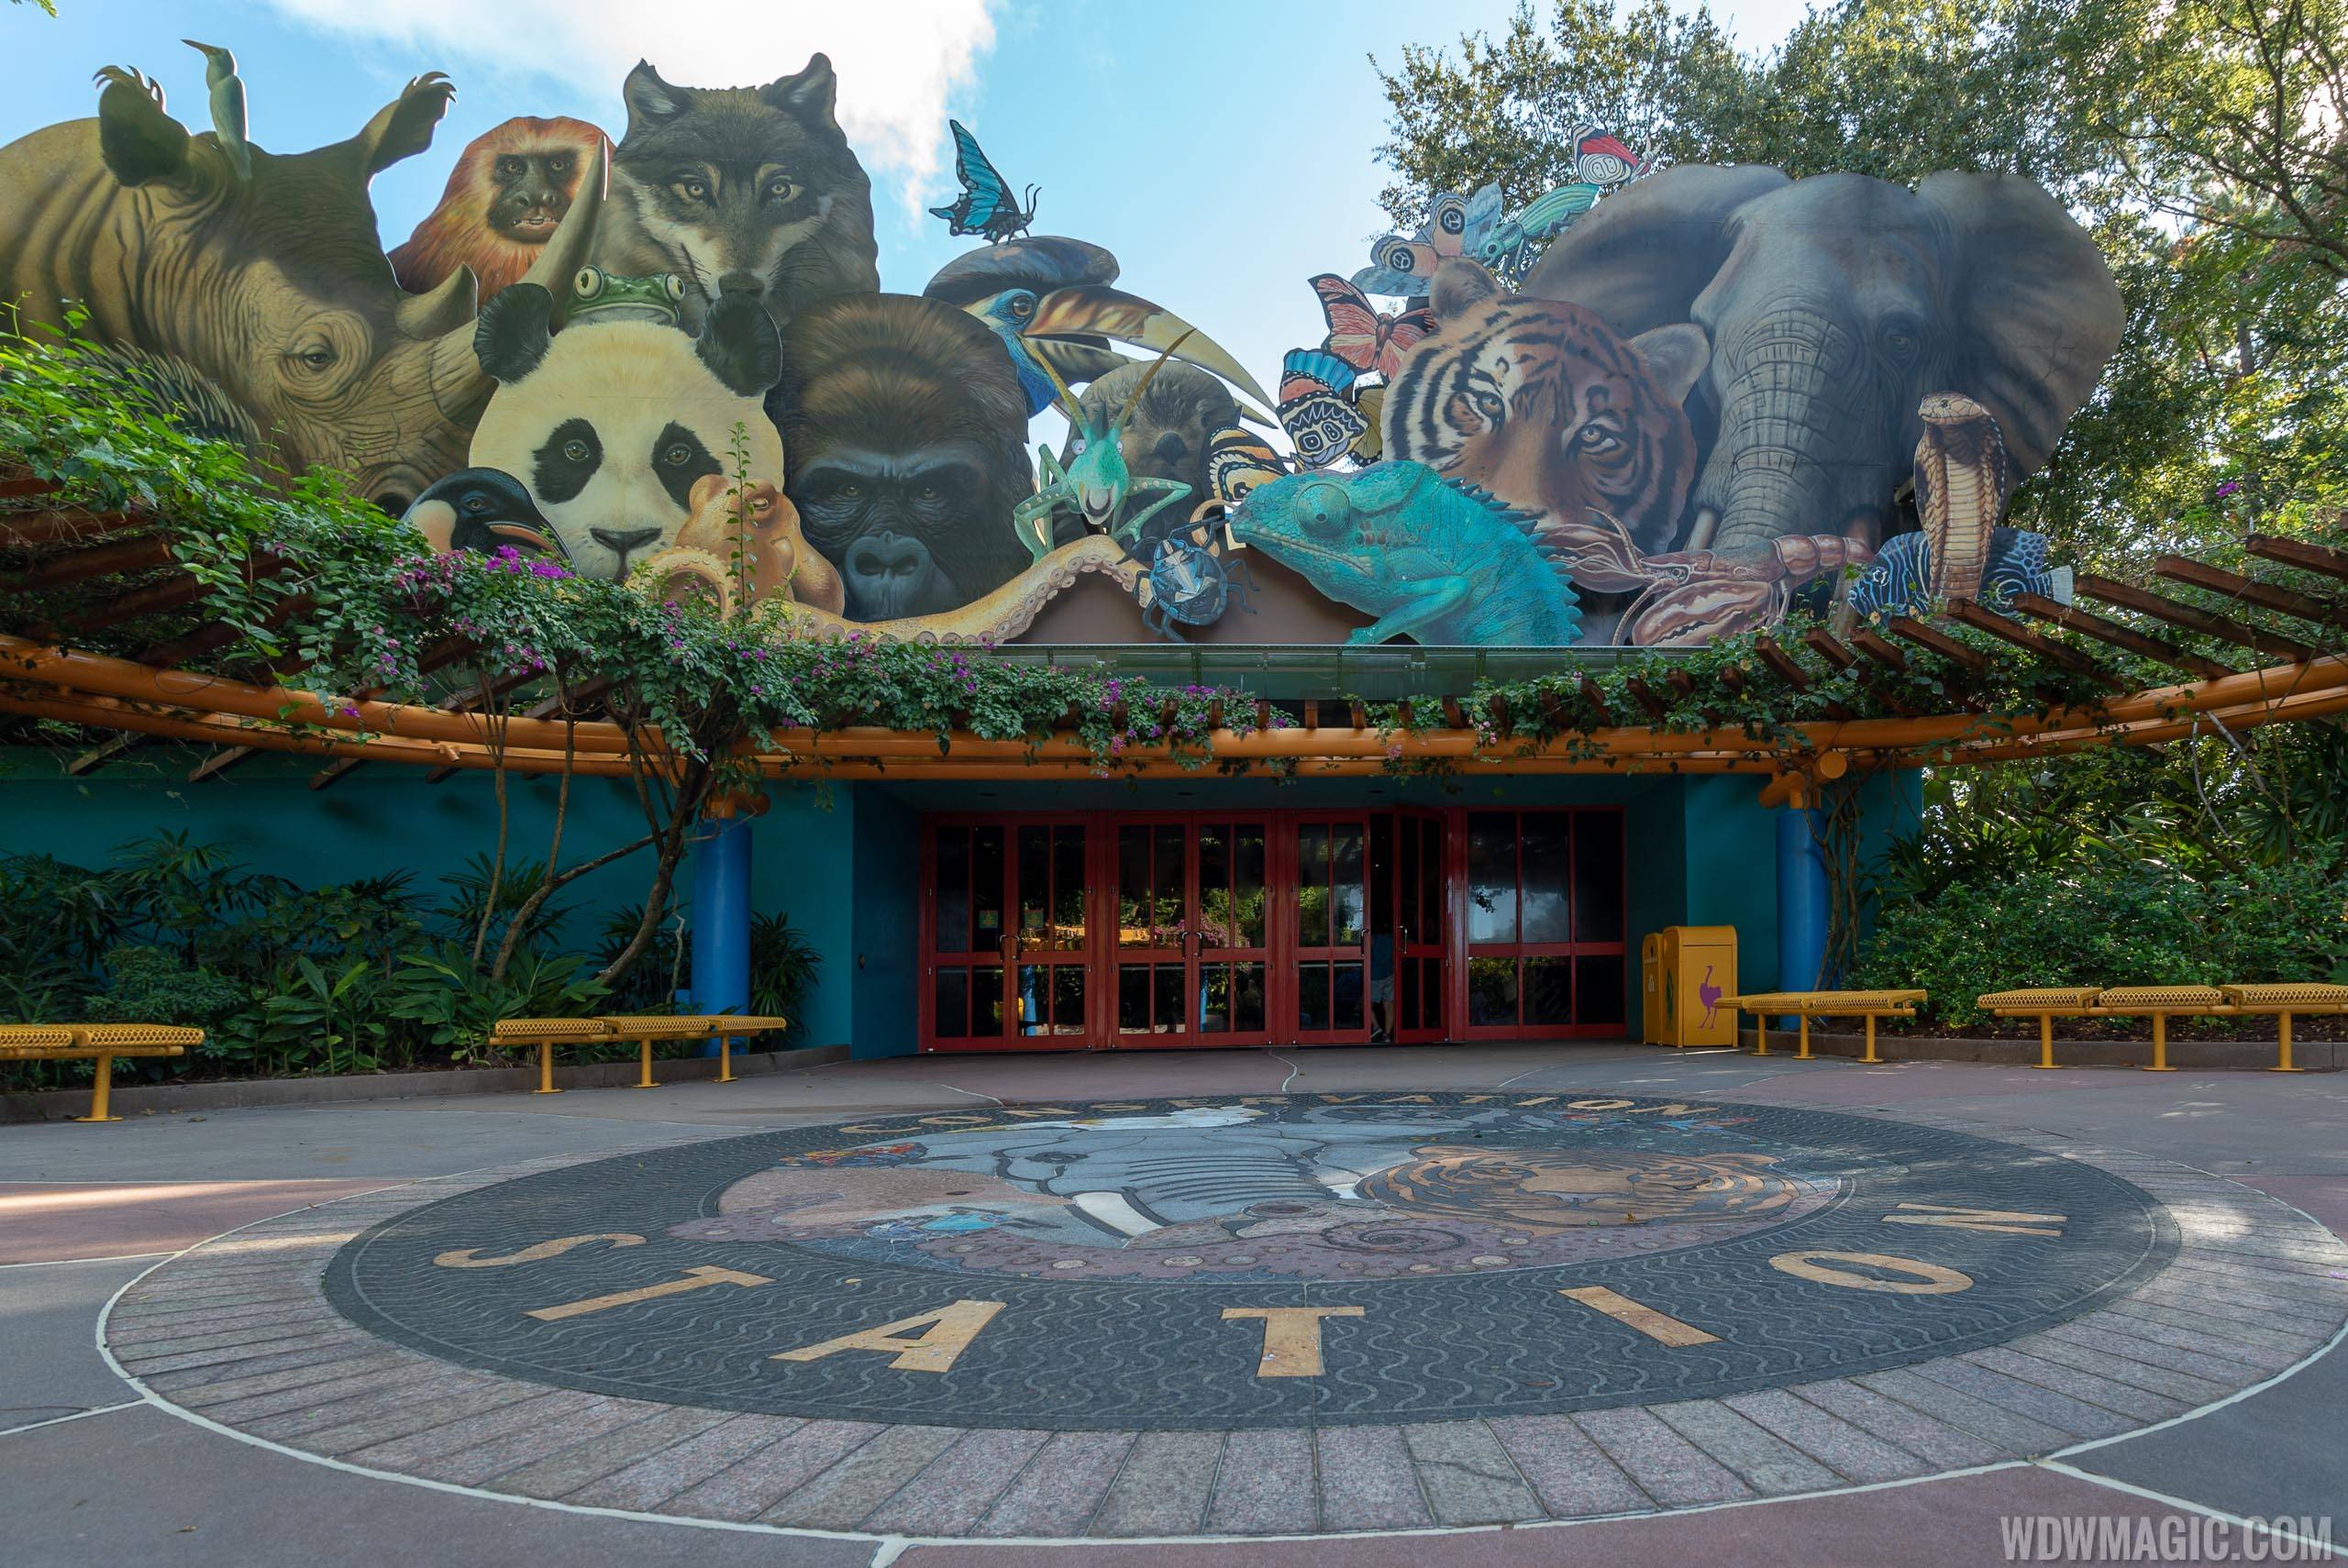 Affection Section reopening at Rafiki's Planet Watch